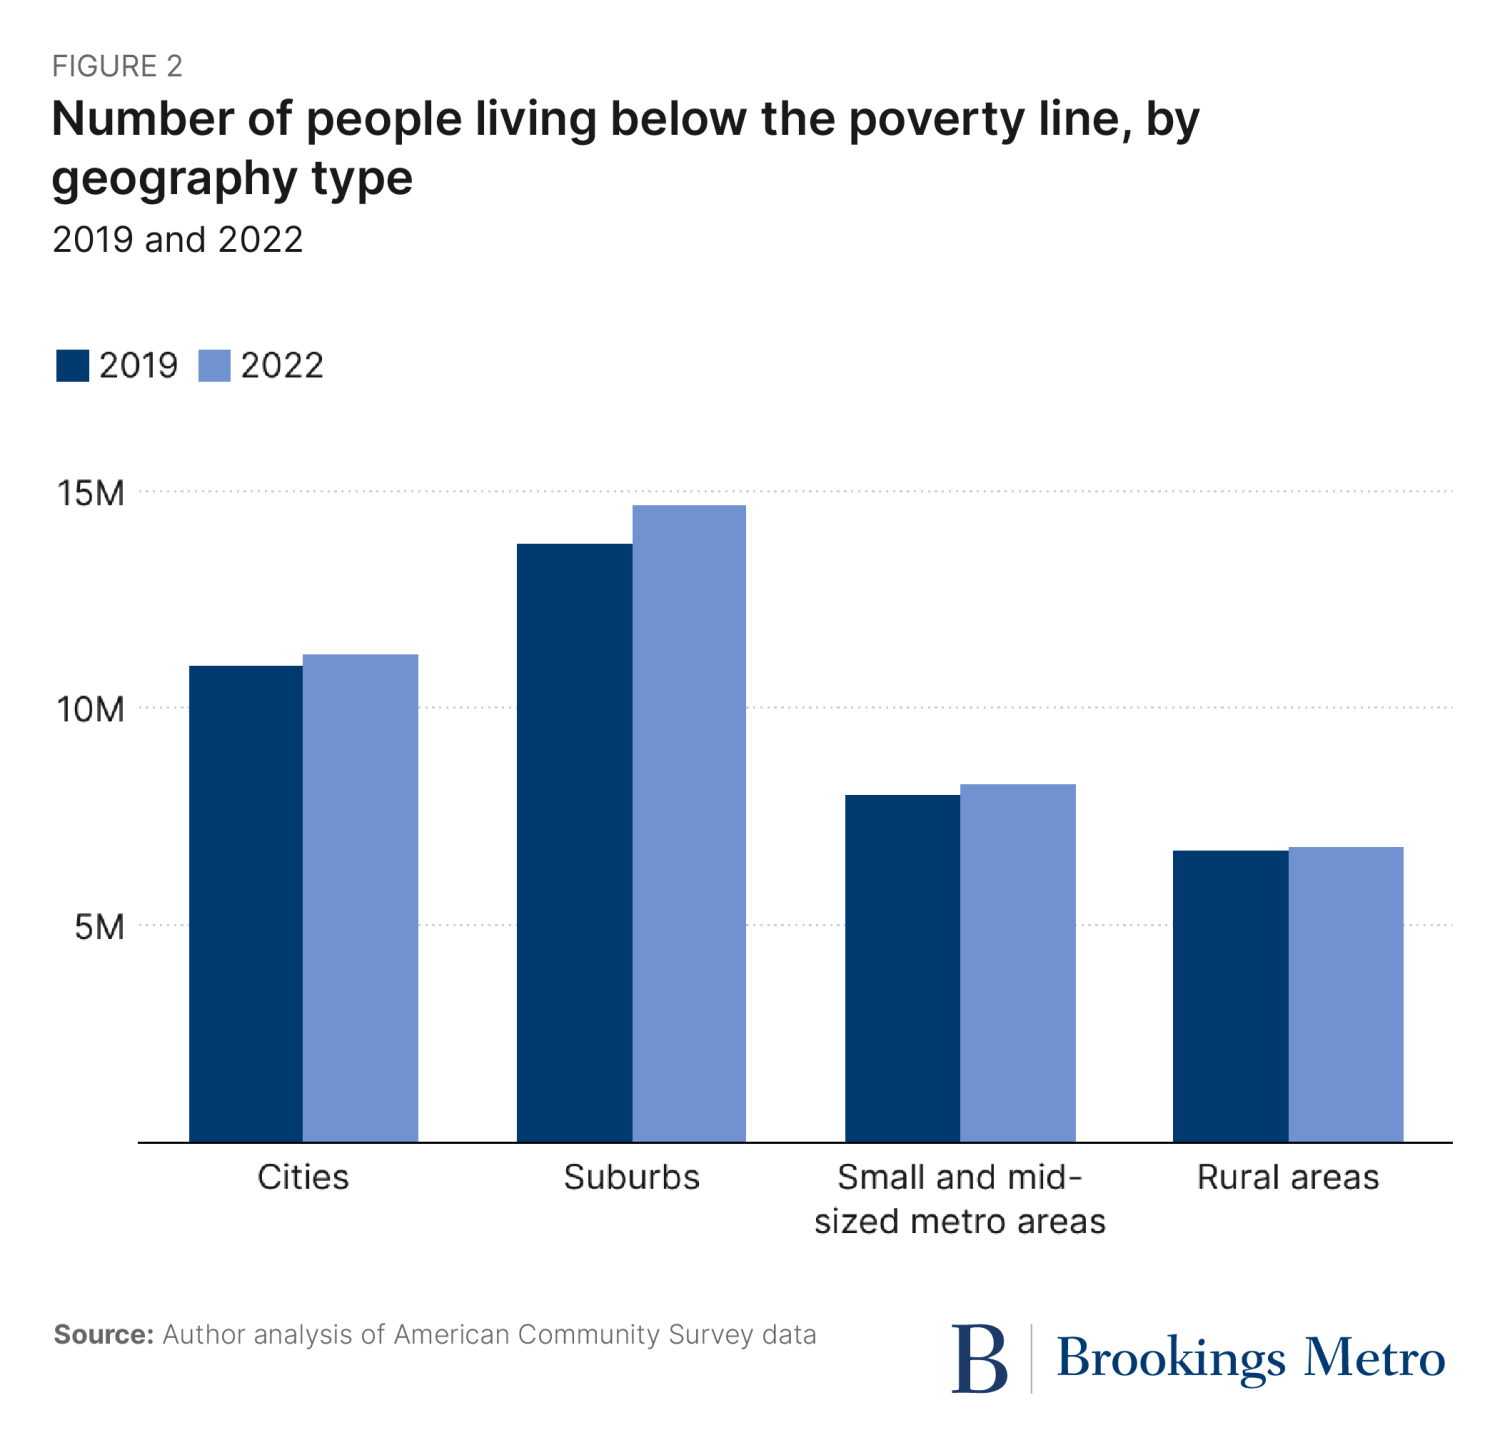 Figure 2. Number of people living below the poverty line, by geography type